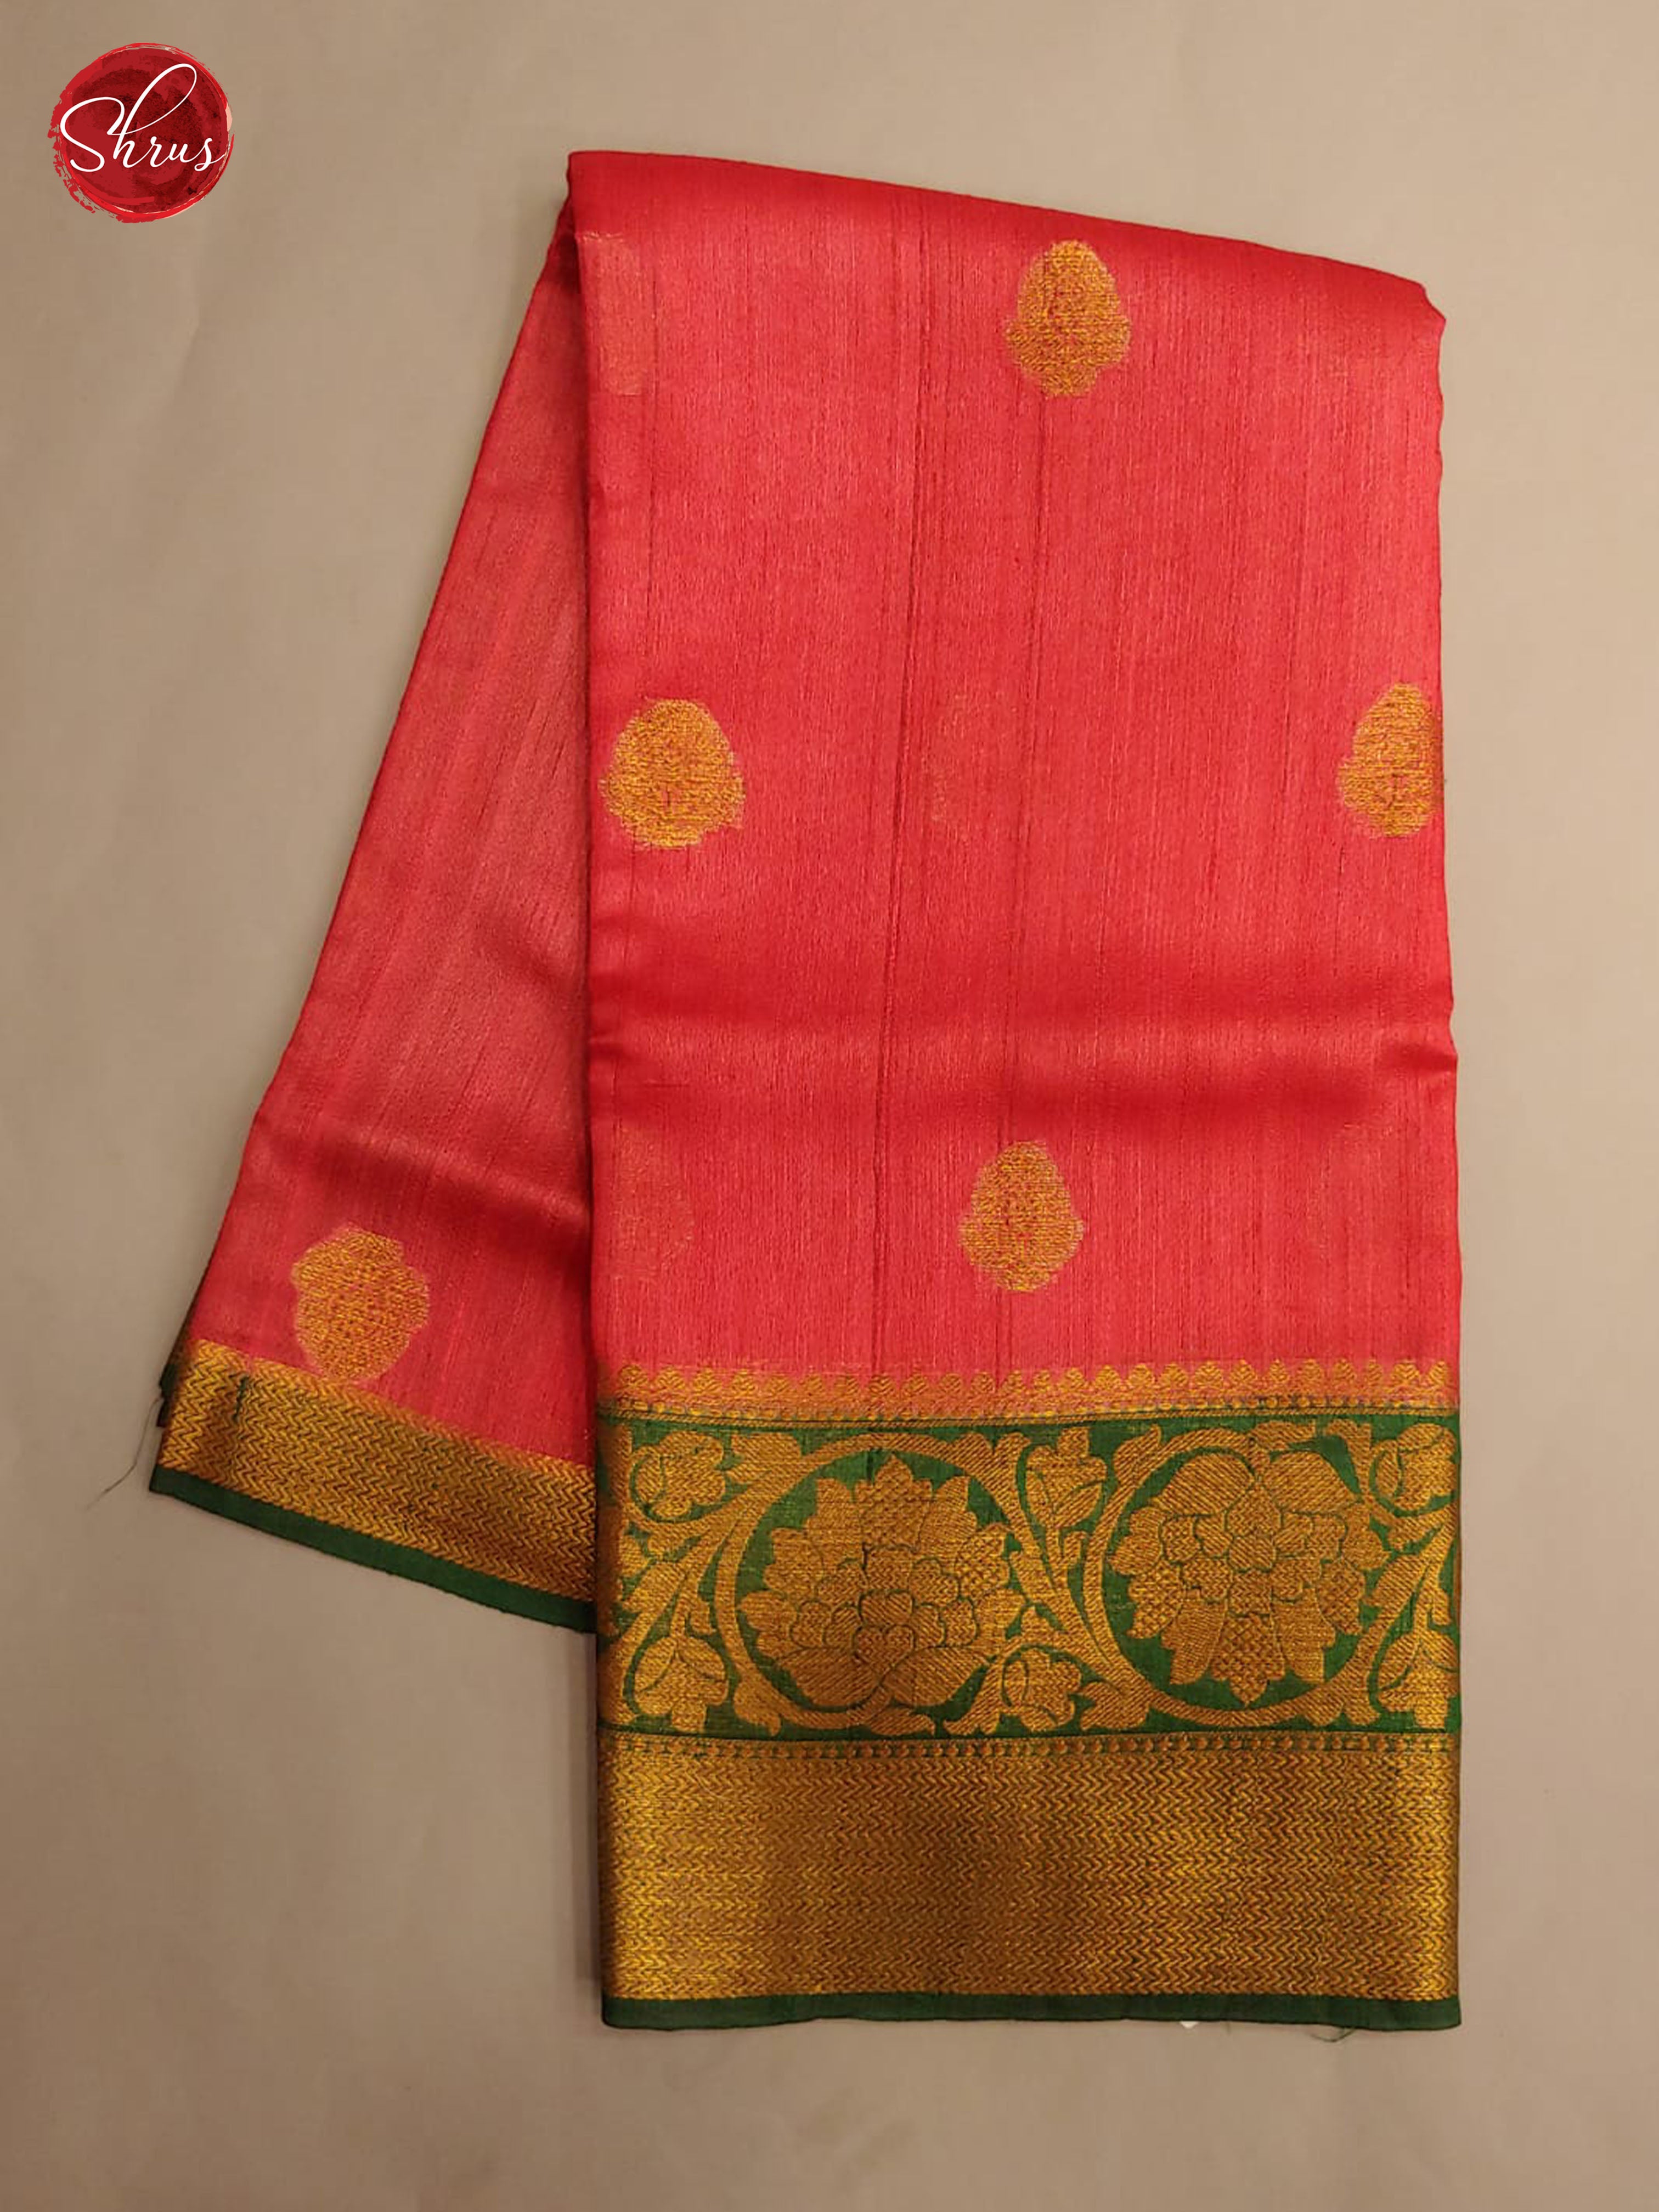 Red & Green- Tussar with Border & Gold Zari - Shop on ShrusEternity.com